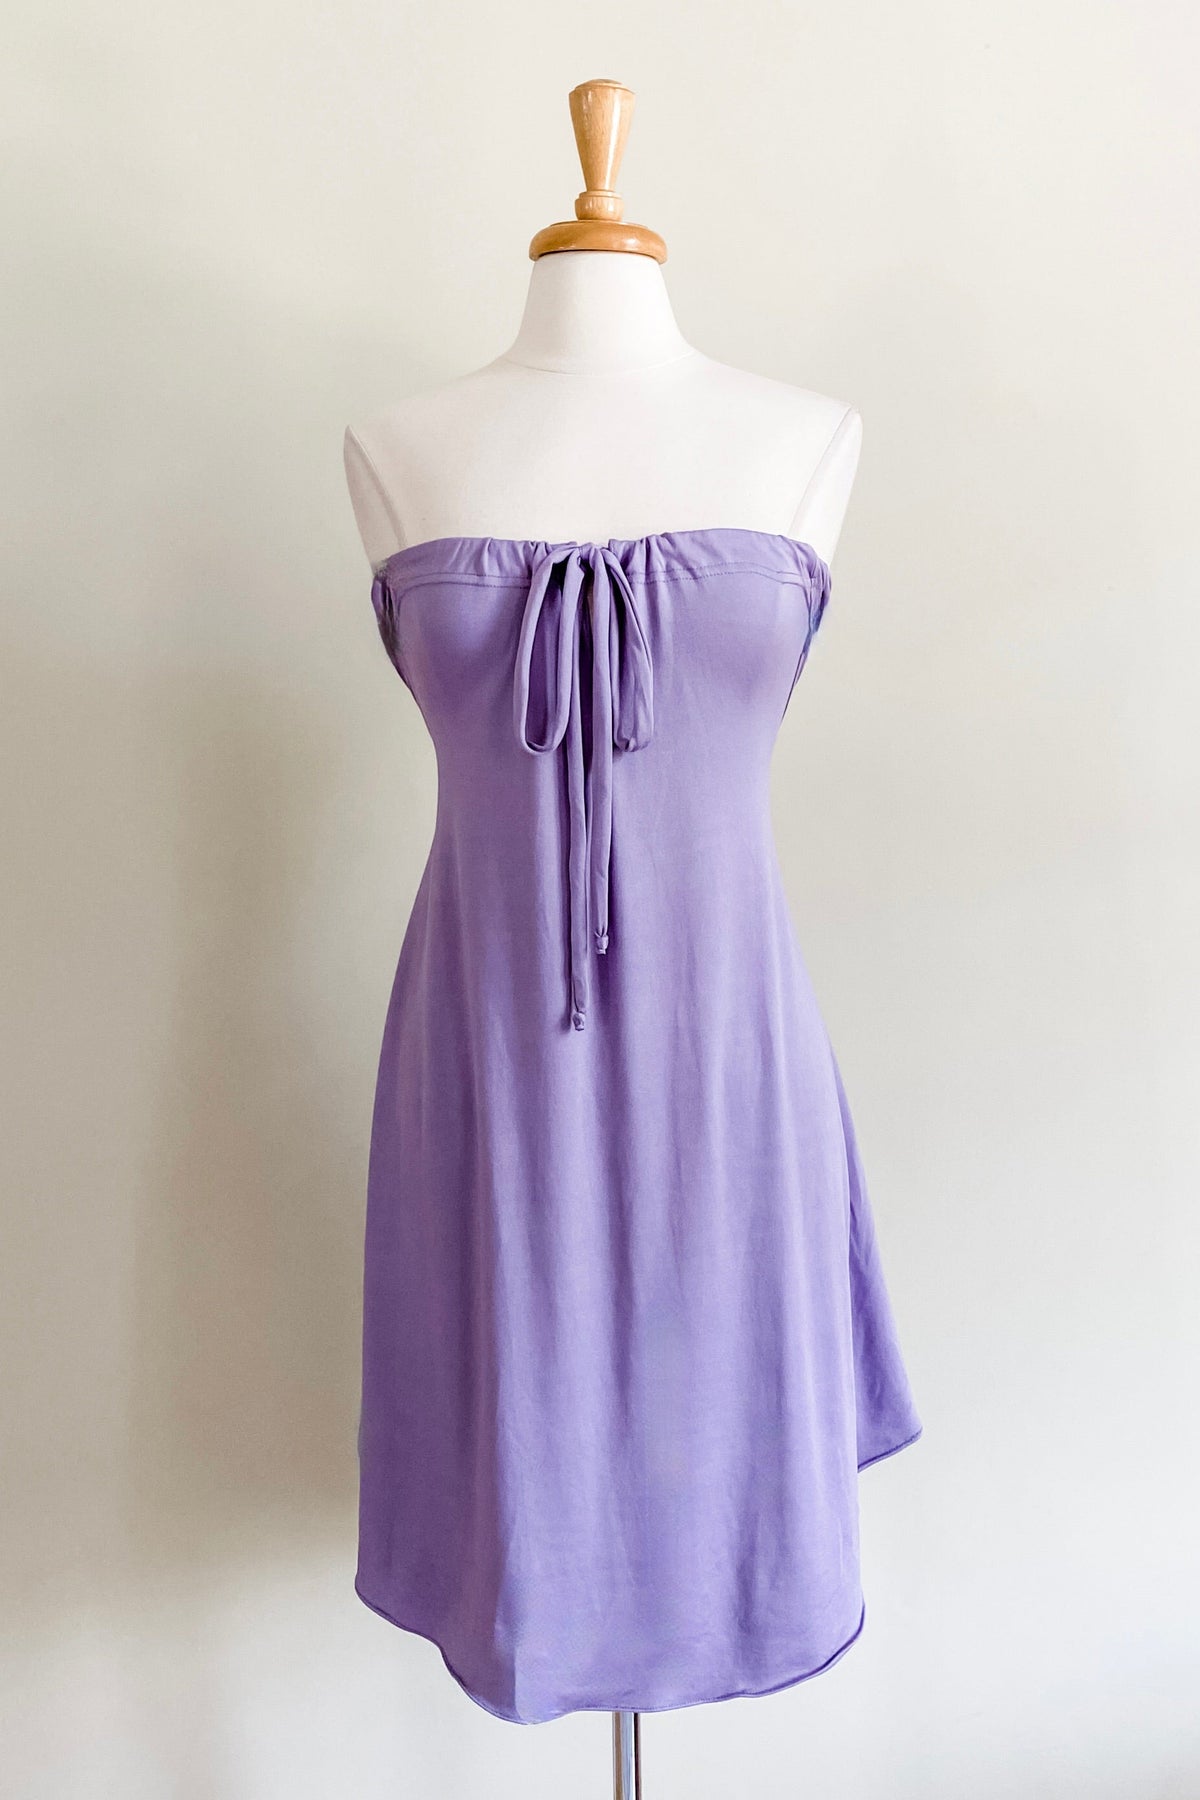 Diane Kroe Evermore Tunic (Purpe) - Warm Weather Capsule Collection